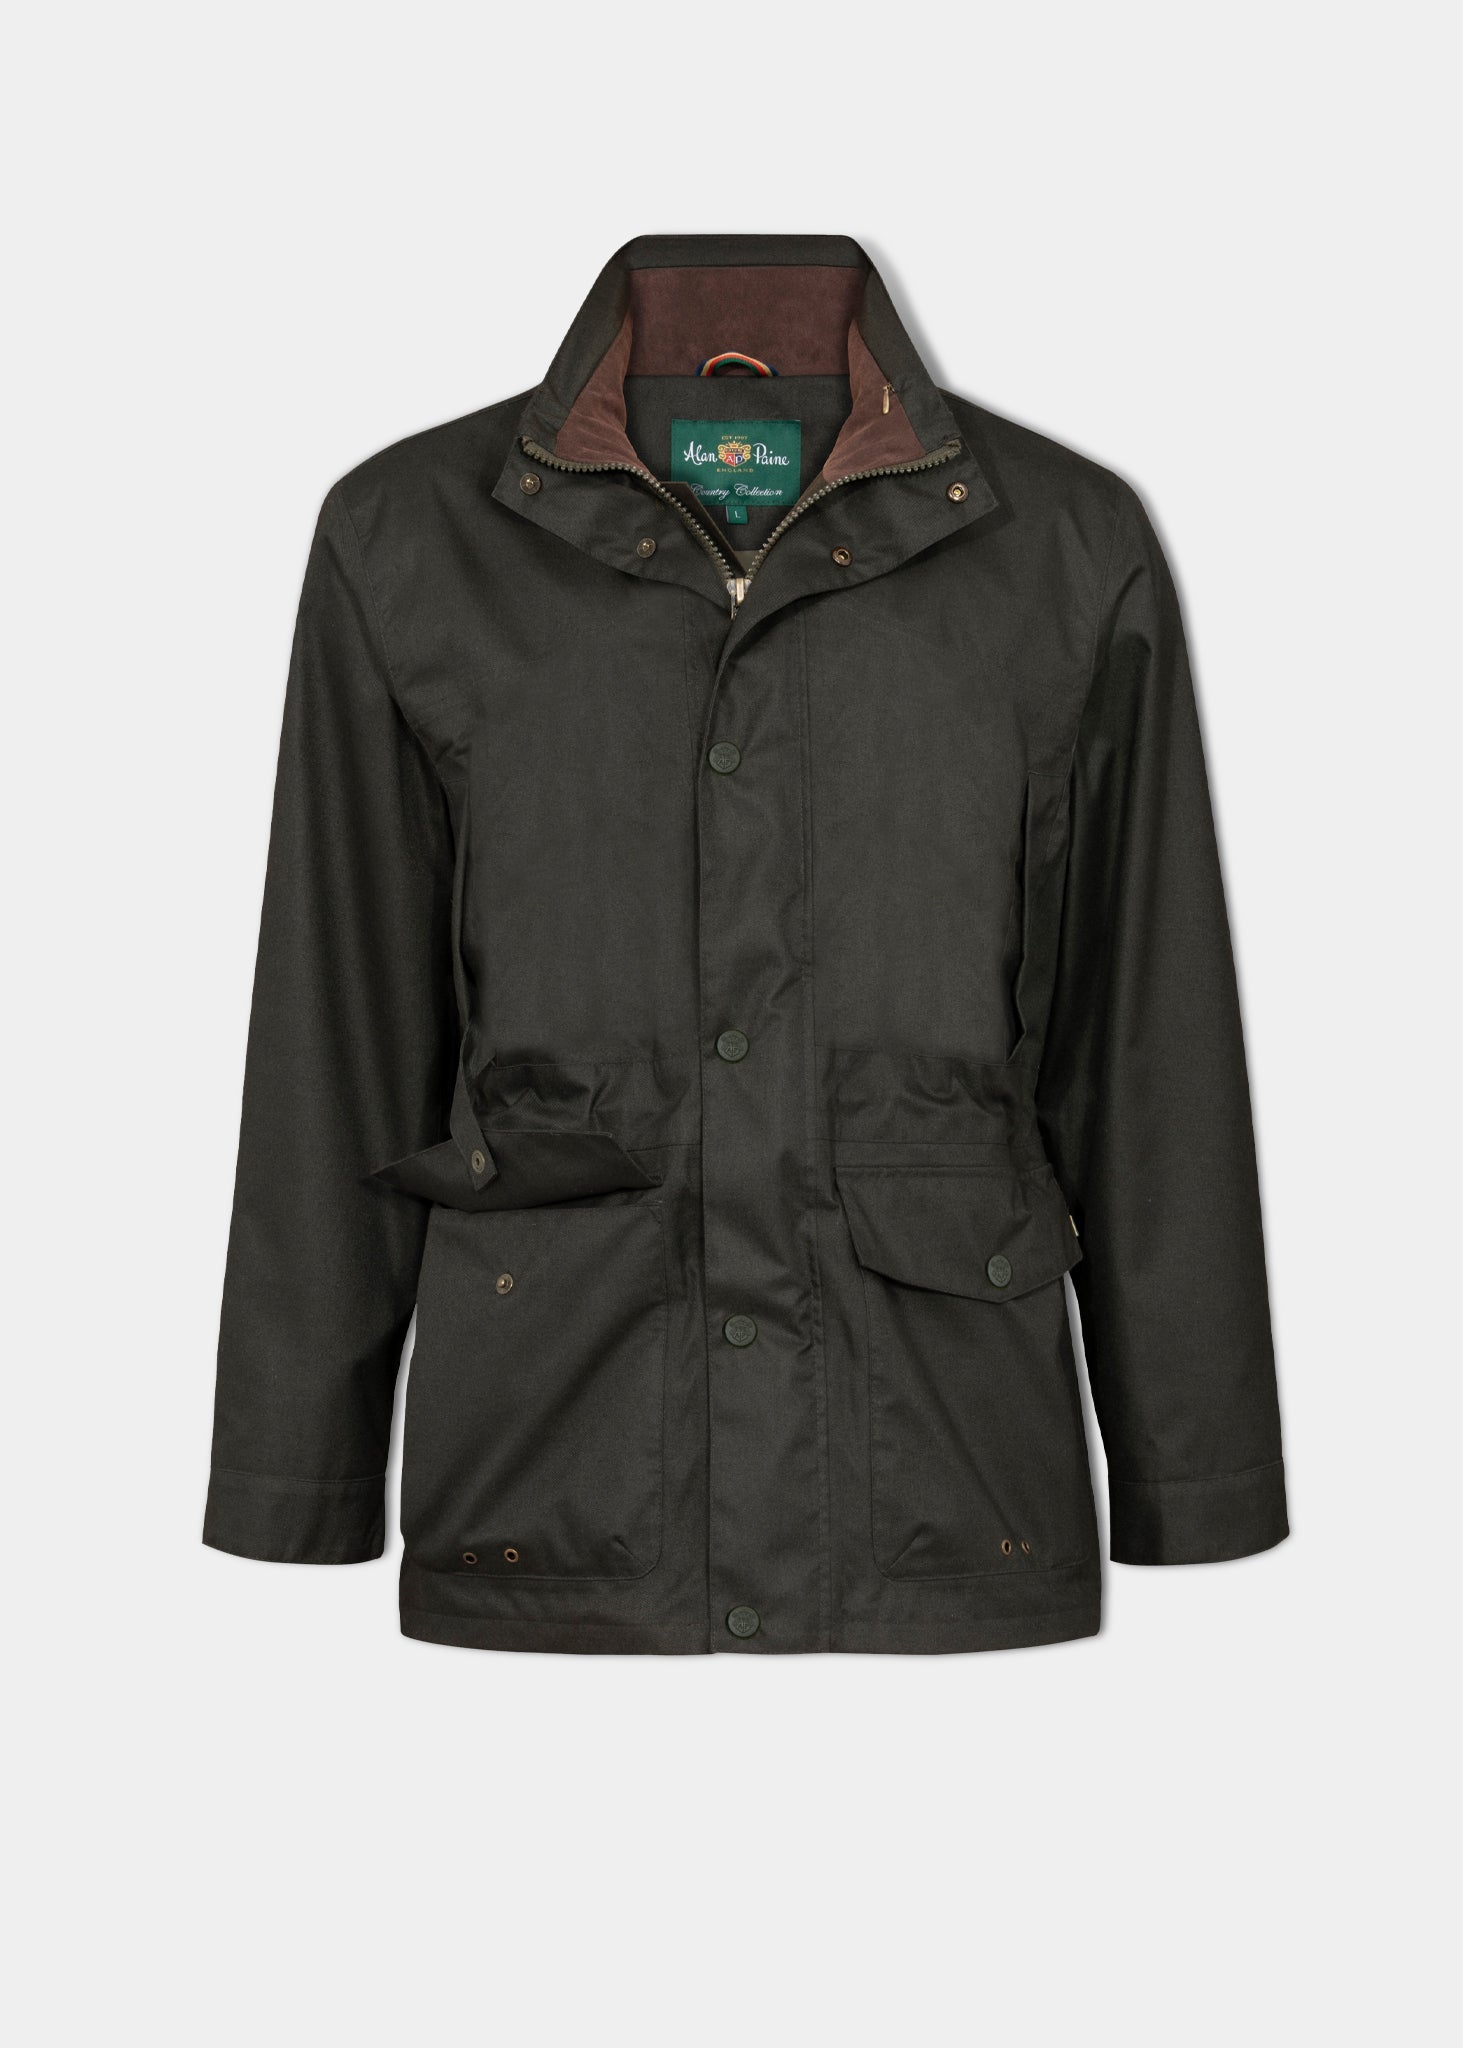 Buy Woodland Jackets For Men At Best Prices Online In India | Tata CLiQ